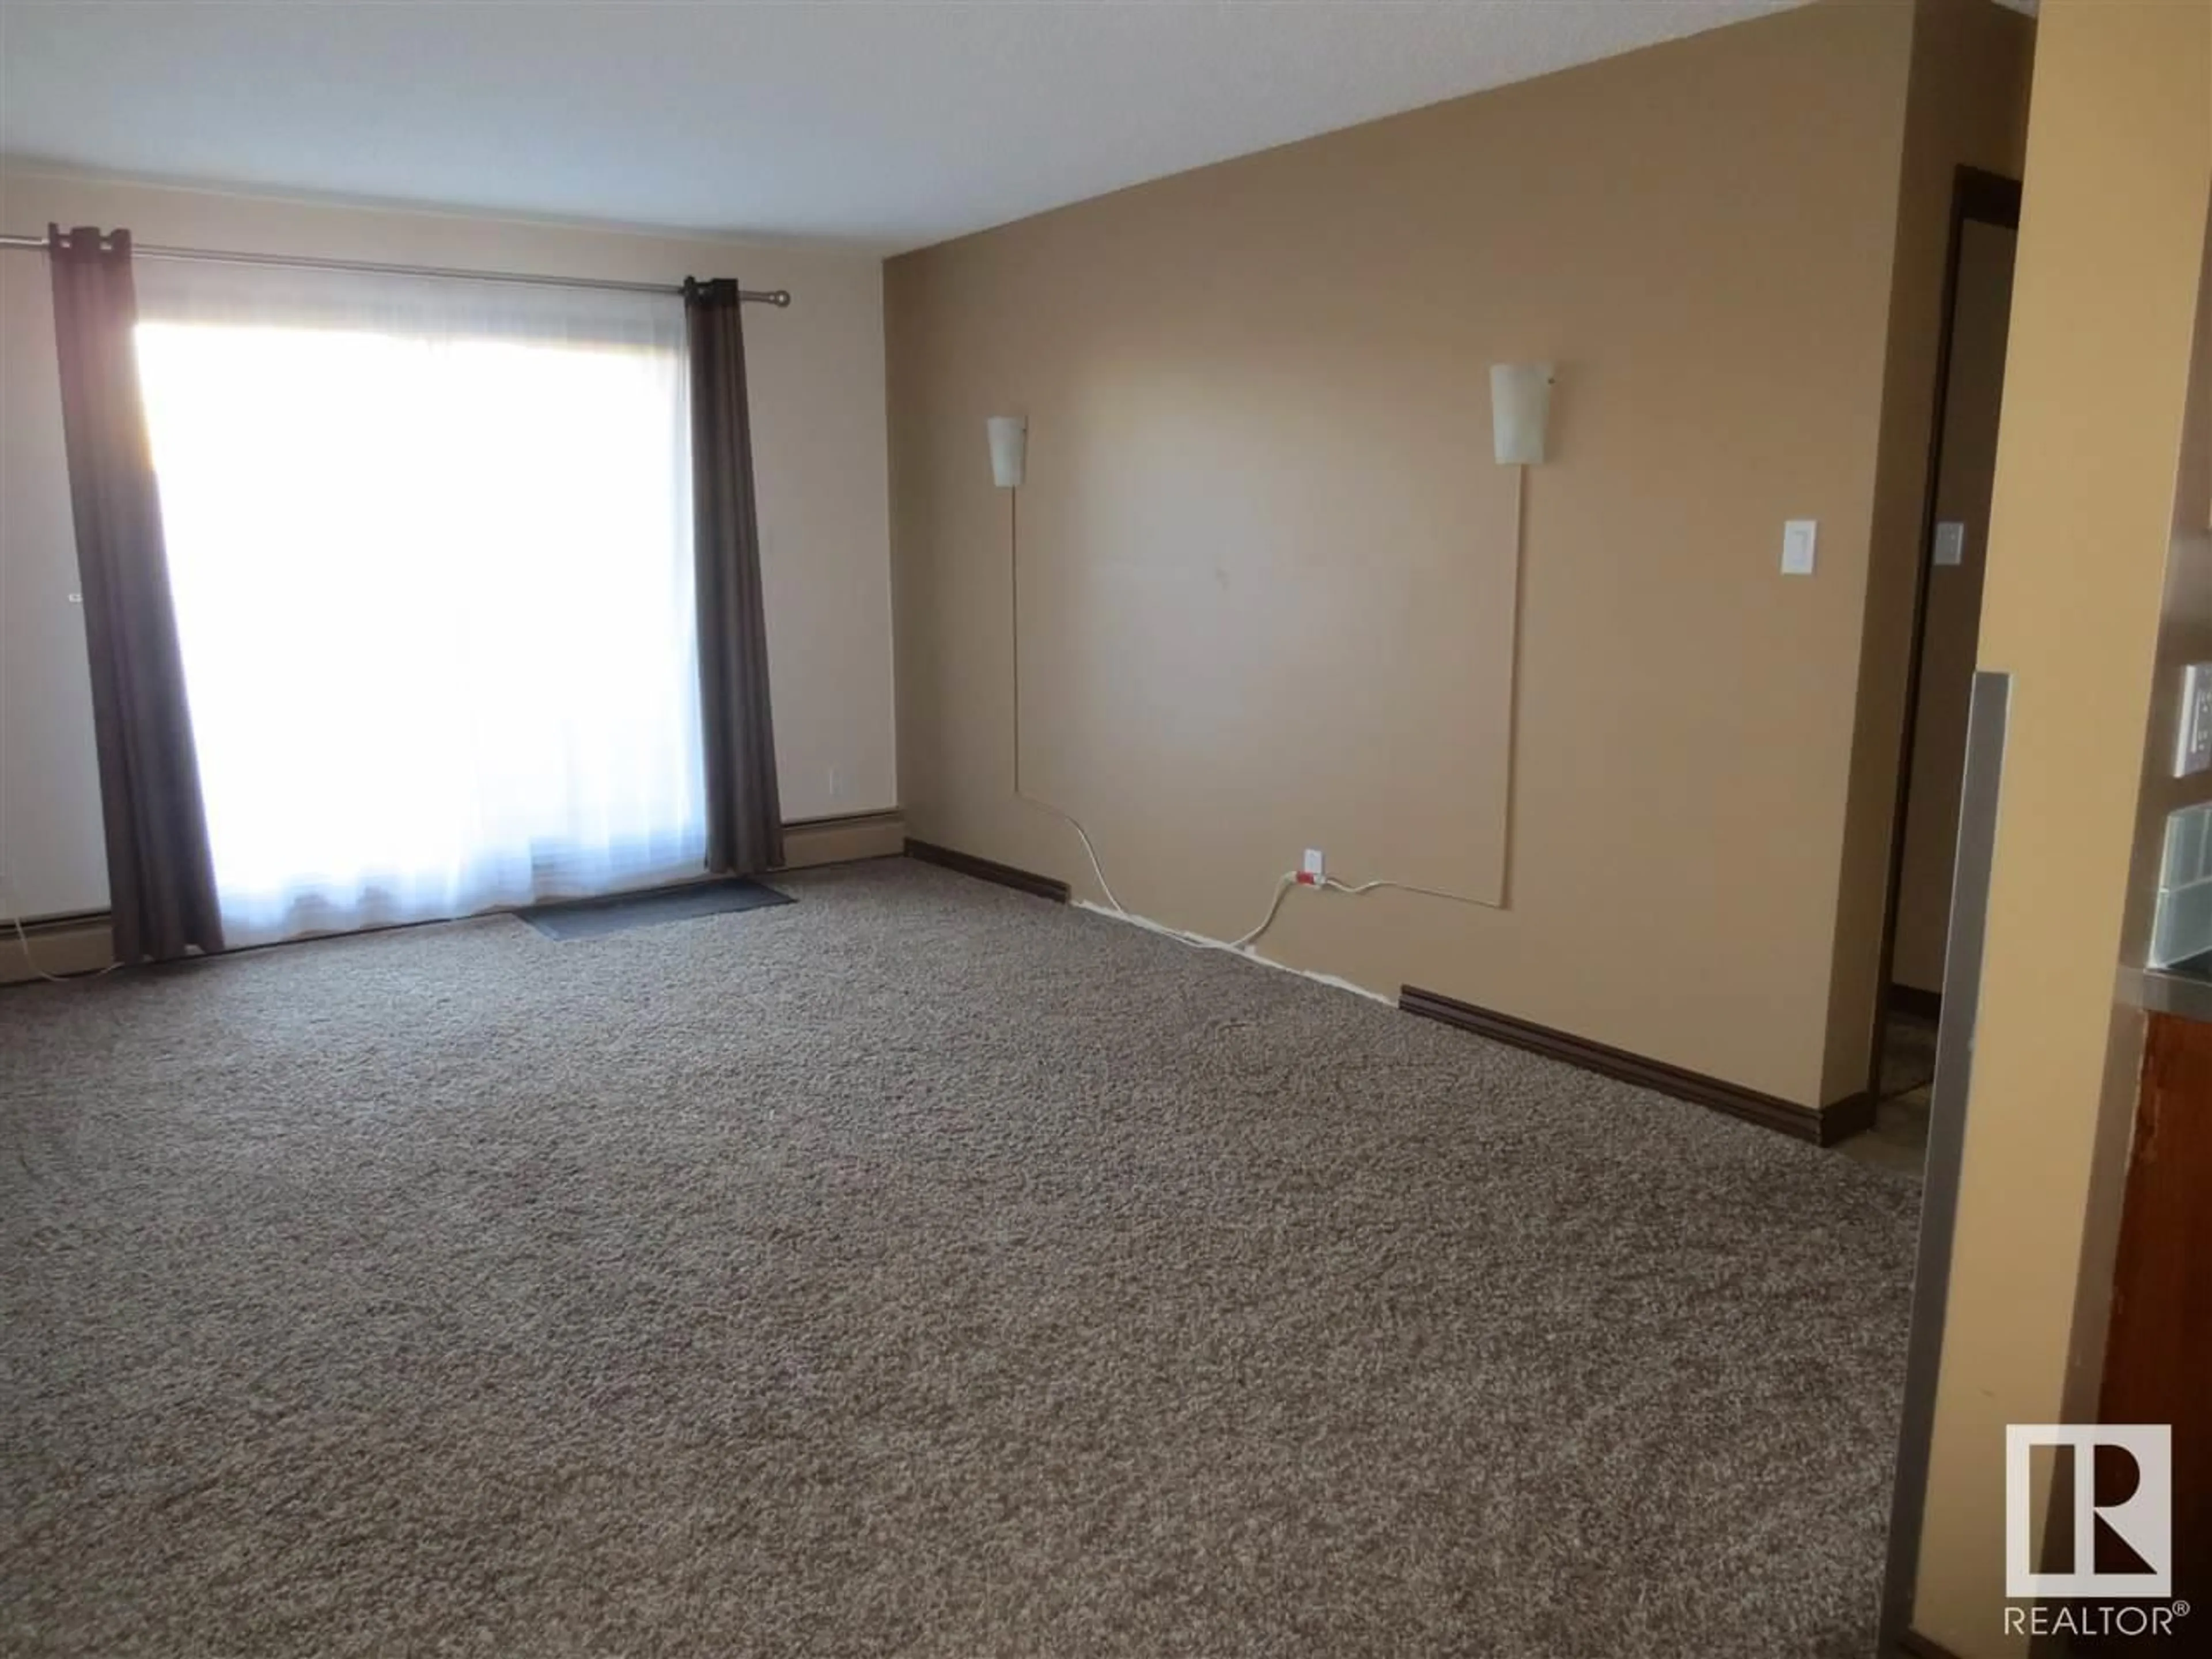 A pic of a room for #110 3610 43 AV NW, Edmonton Alberta T6L5T2